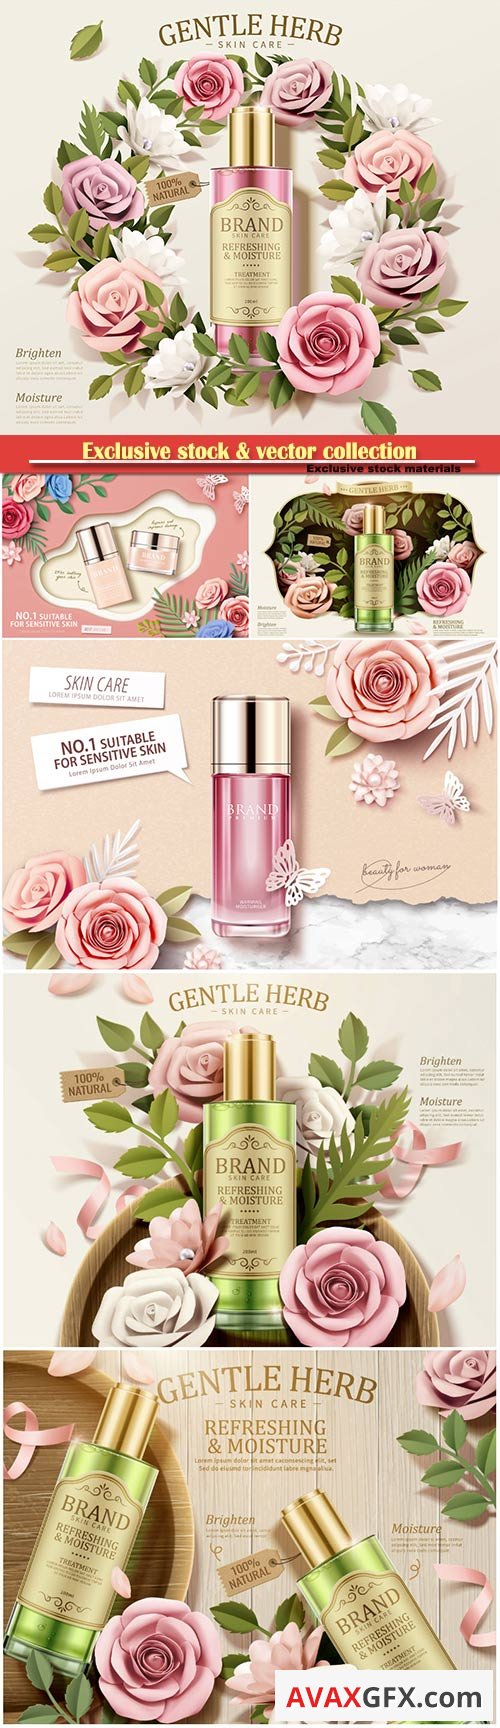 Gentle herb toner ads with paper flowers in 3d illustration, top view